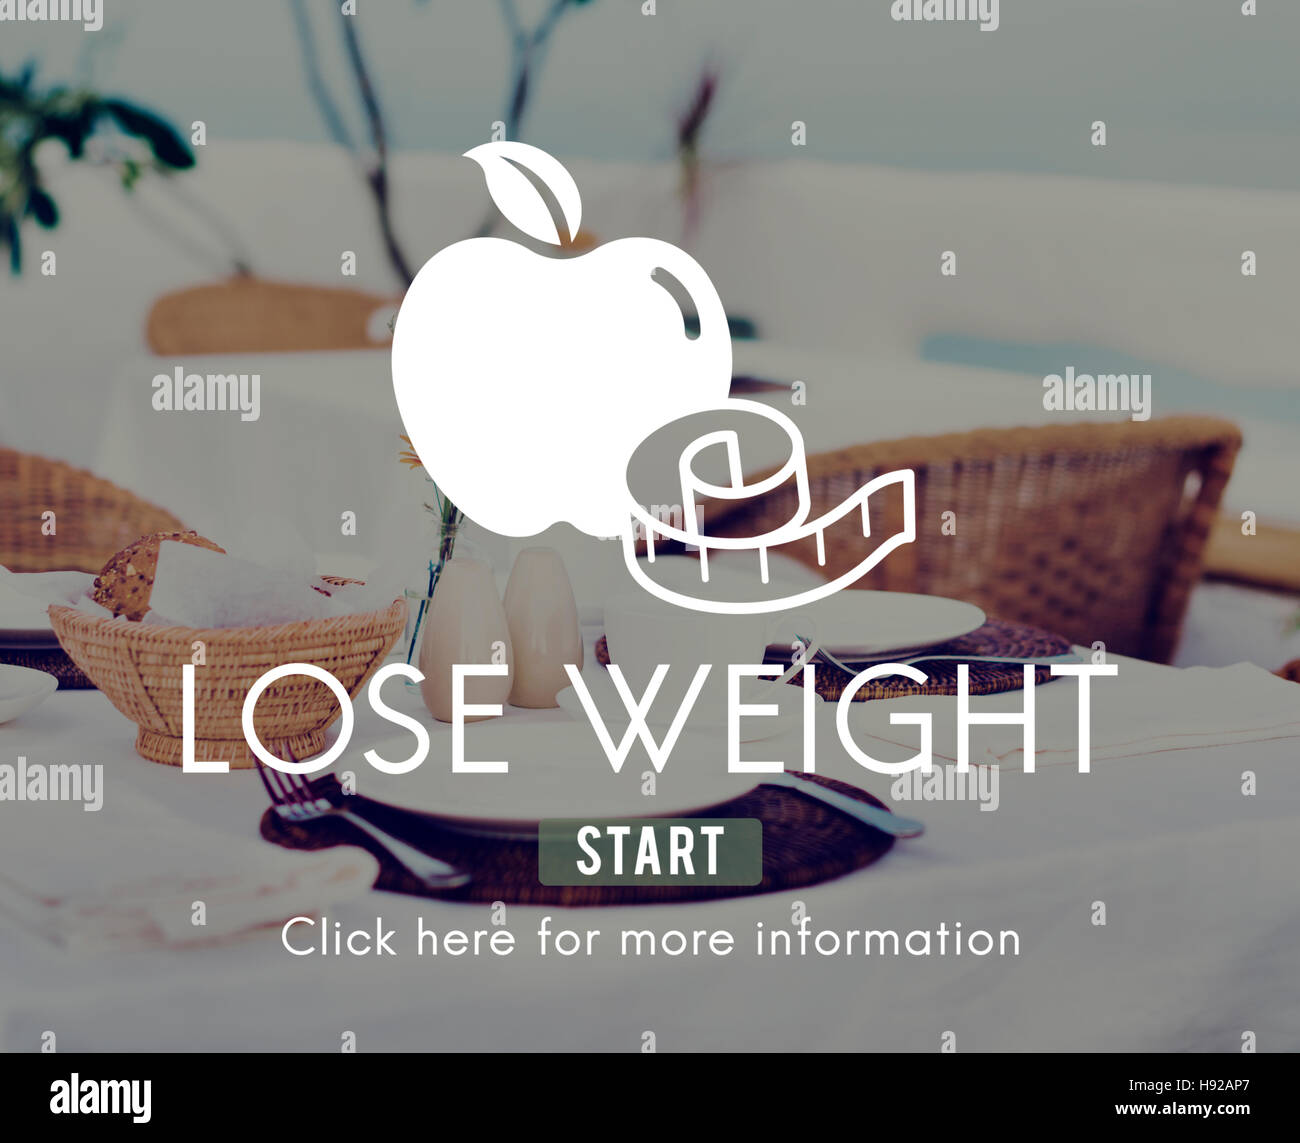 Lose Weight Balance Fitness Slim Diet Nutrition Concept Stock Photo